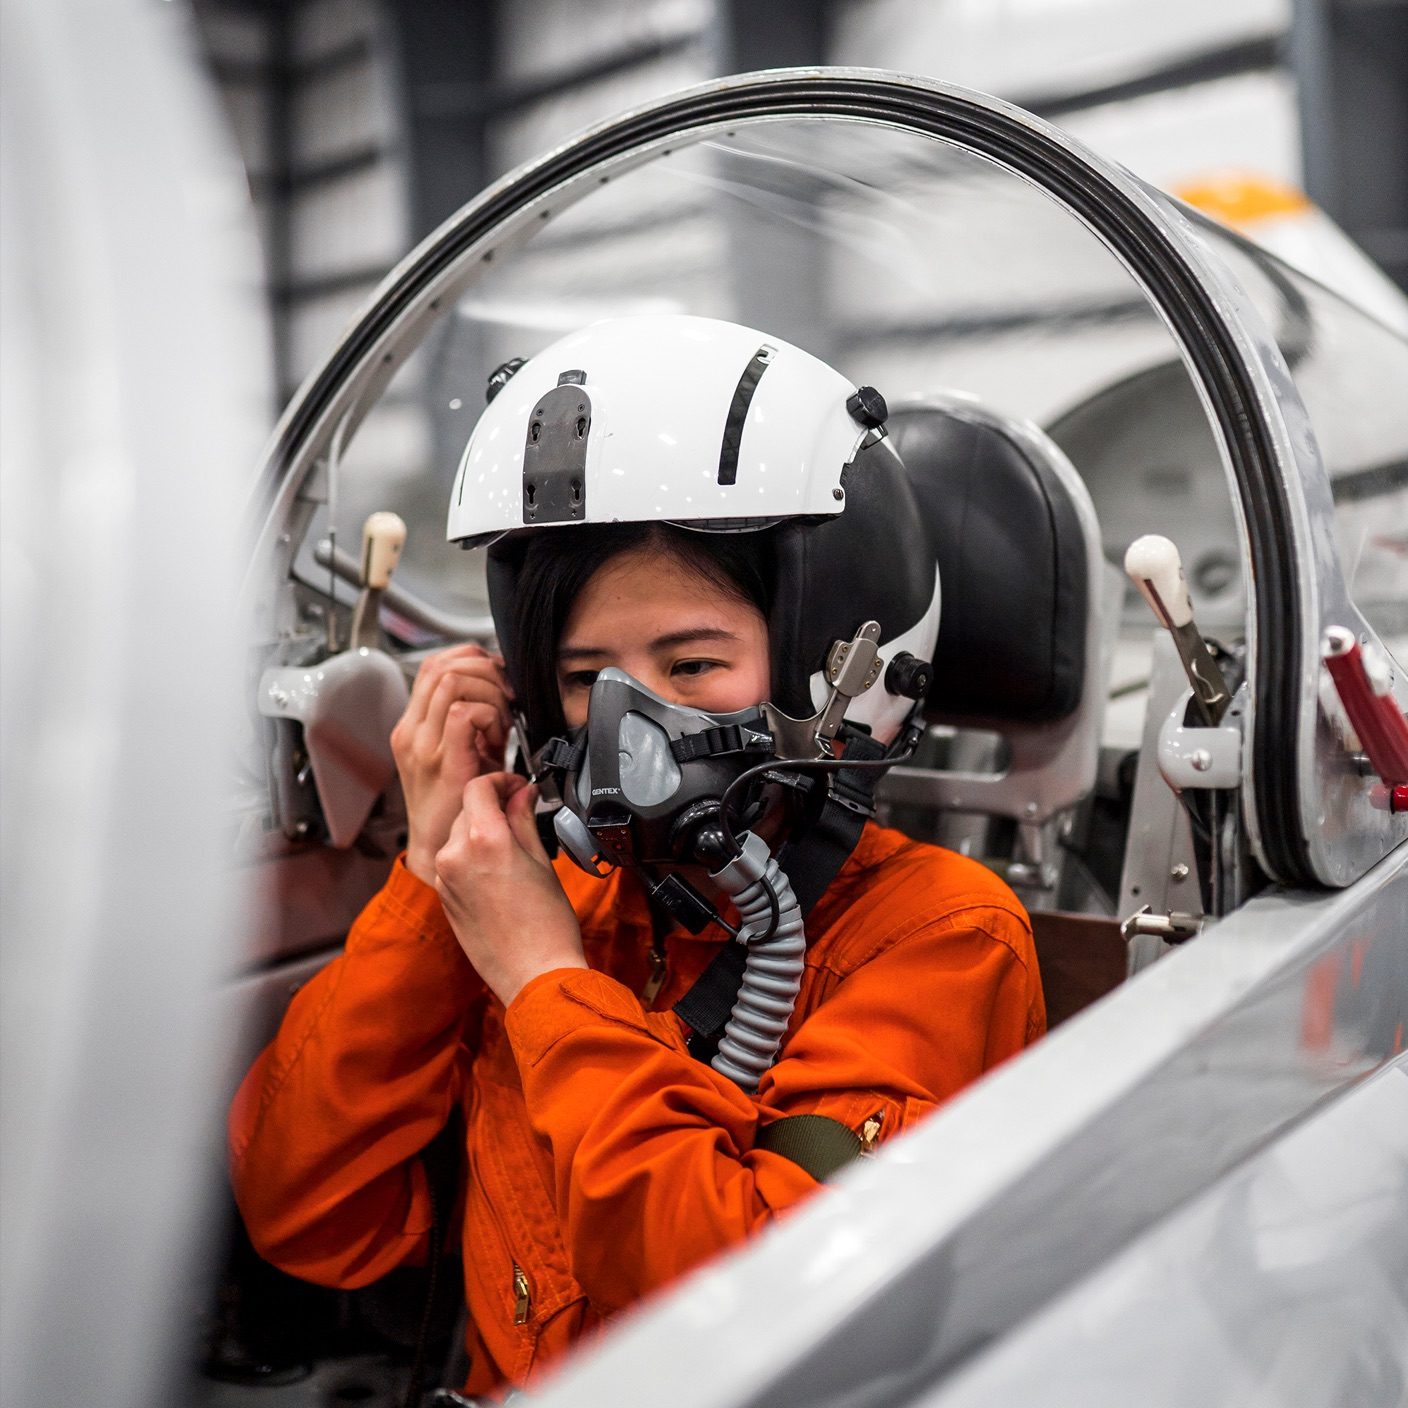 pilot in an orange suit putting on her helmet getting ready for takeoff